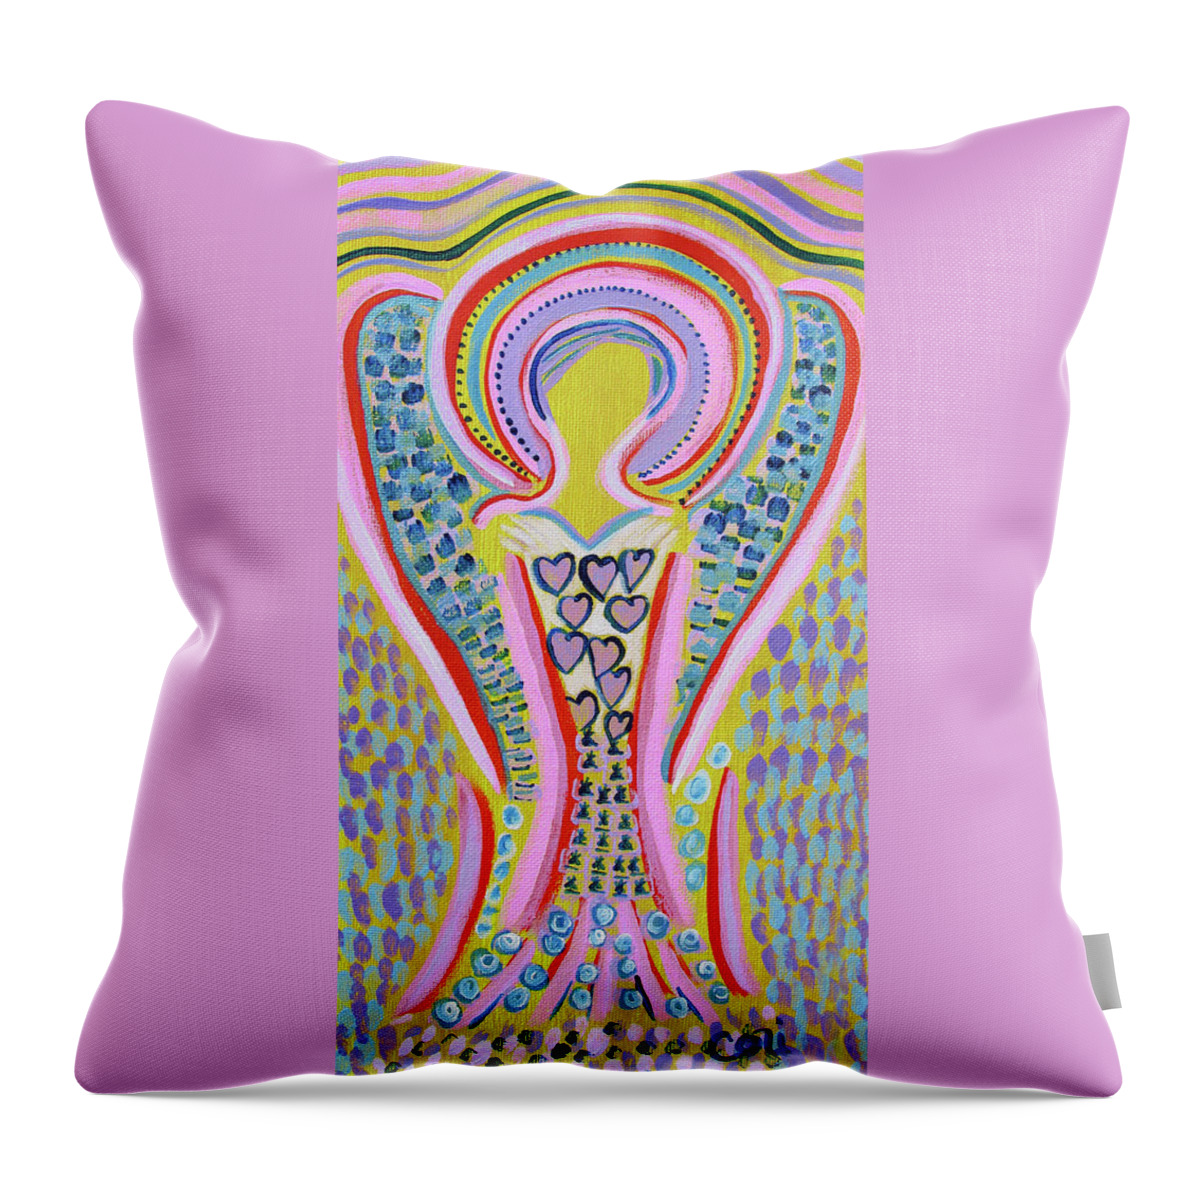 Angel Throw Pillow featuring the painting Angel by the Sea by Corinne Carroll